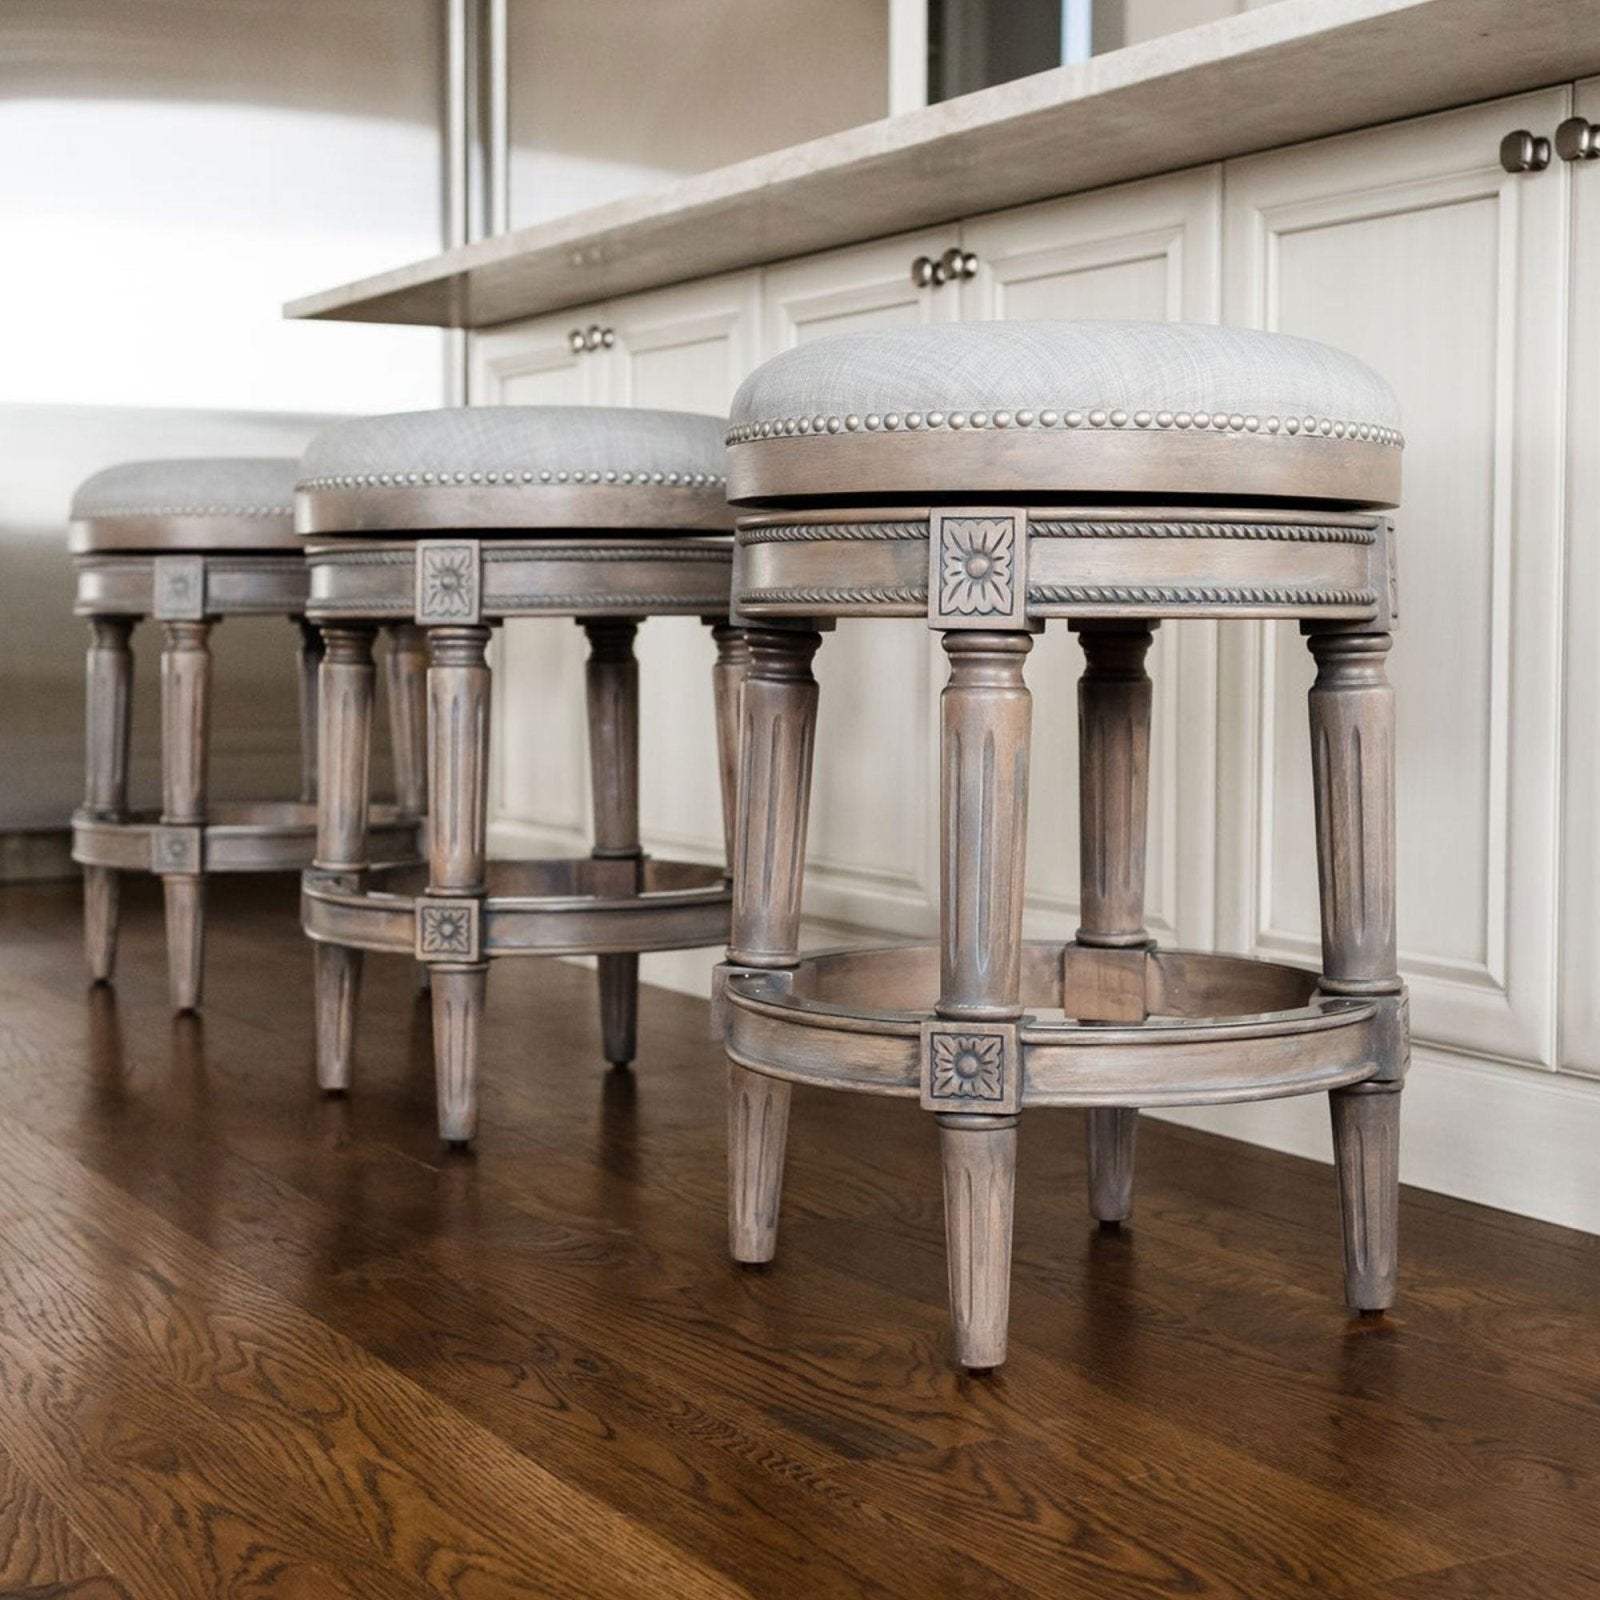 Pullman Backless Bar Stool in Reclaimed Oak Finish with Ash Grey Fabric Upholstery in Stools by Maven Lane